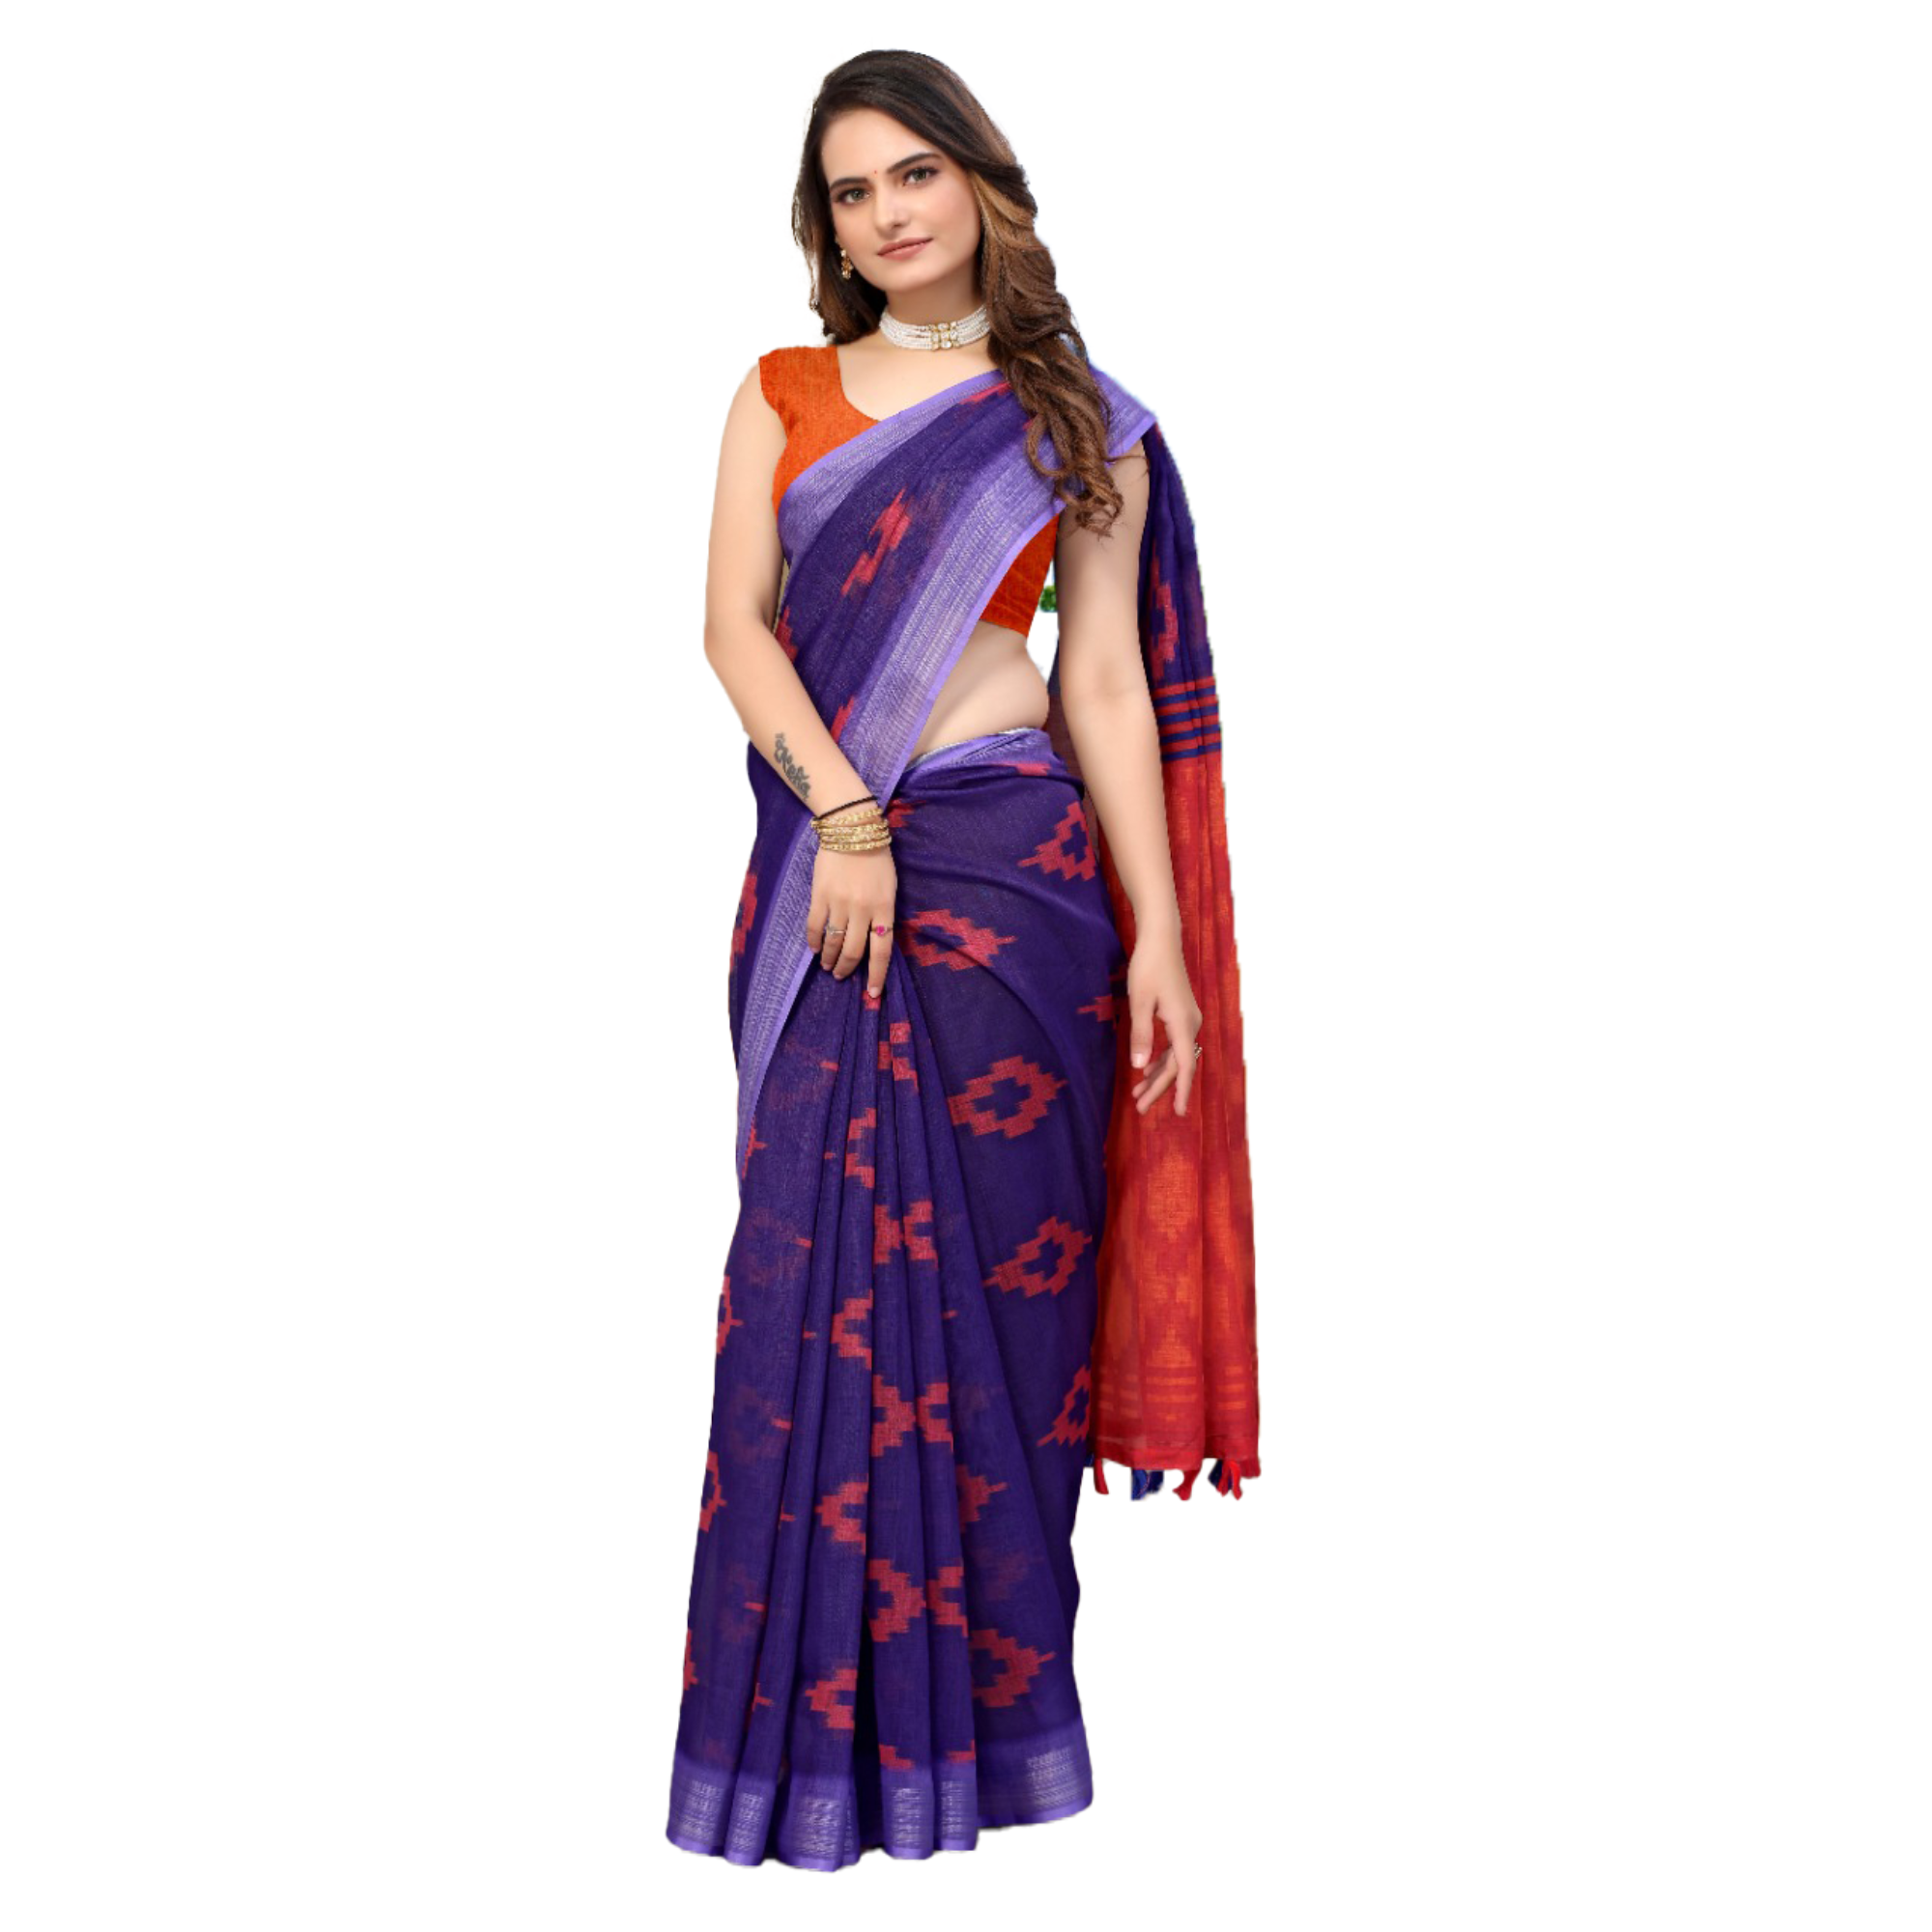 Women's Linen Blue Saree with Red Geometrical Design with purple border and contrast Red Pallu - TheHangr